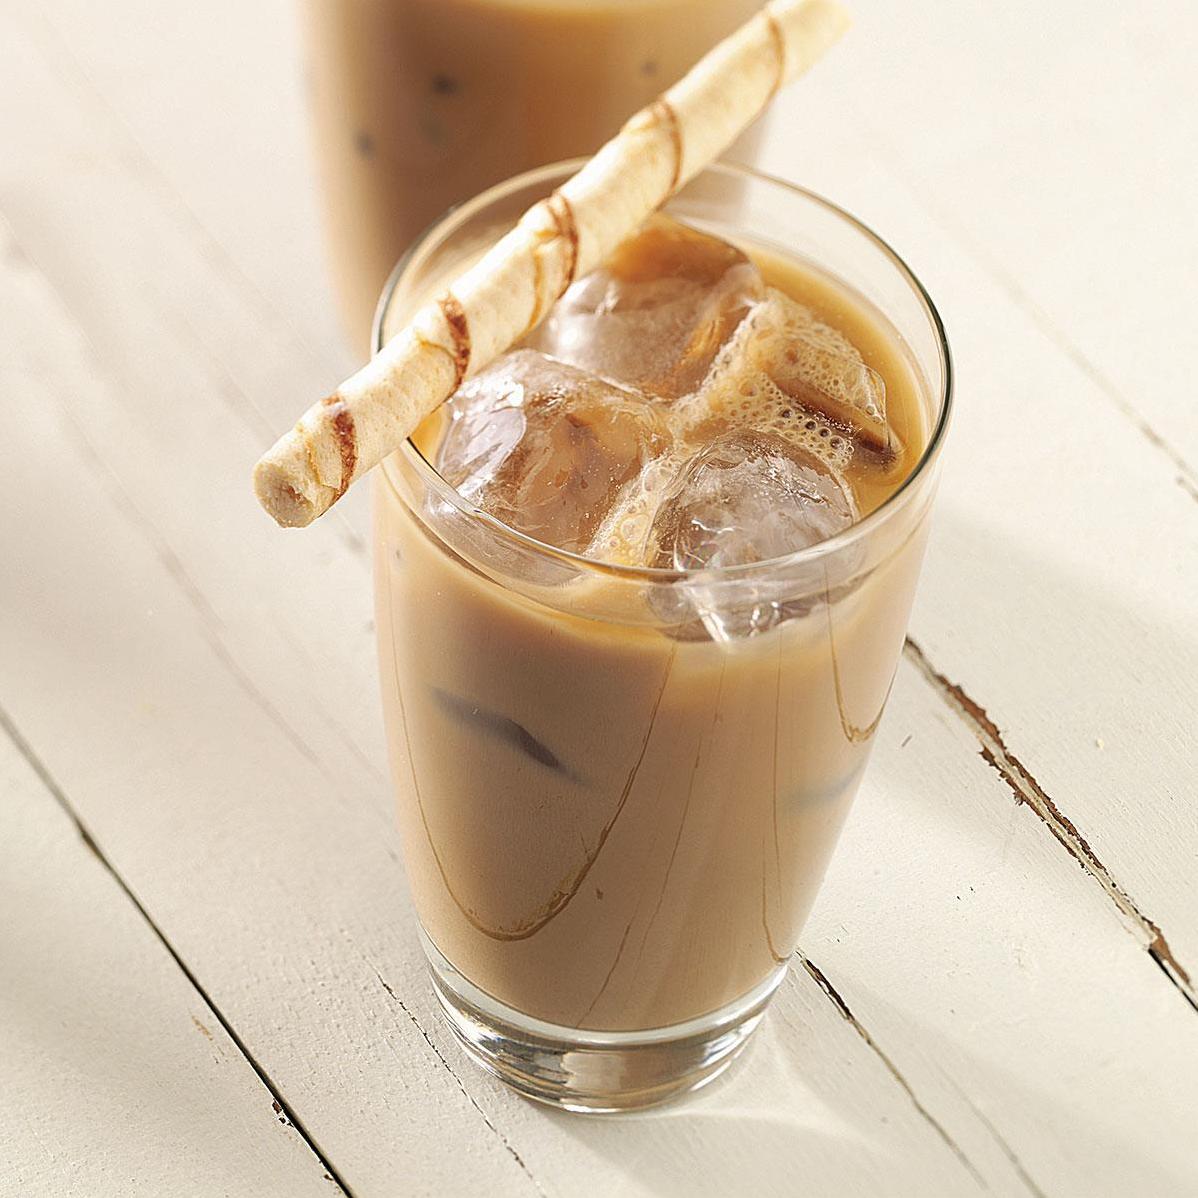  Drink up and cool down with our iced latte recipe.